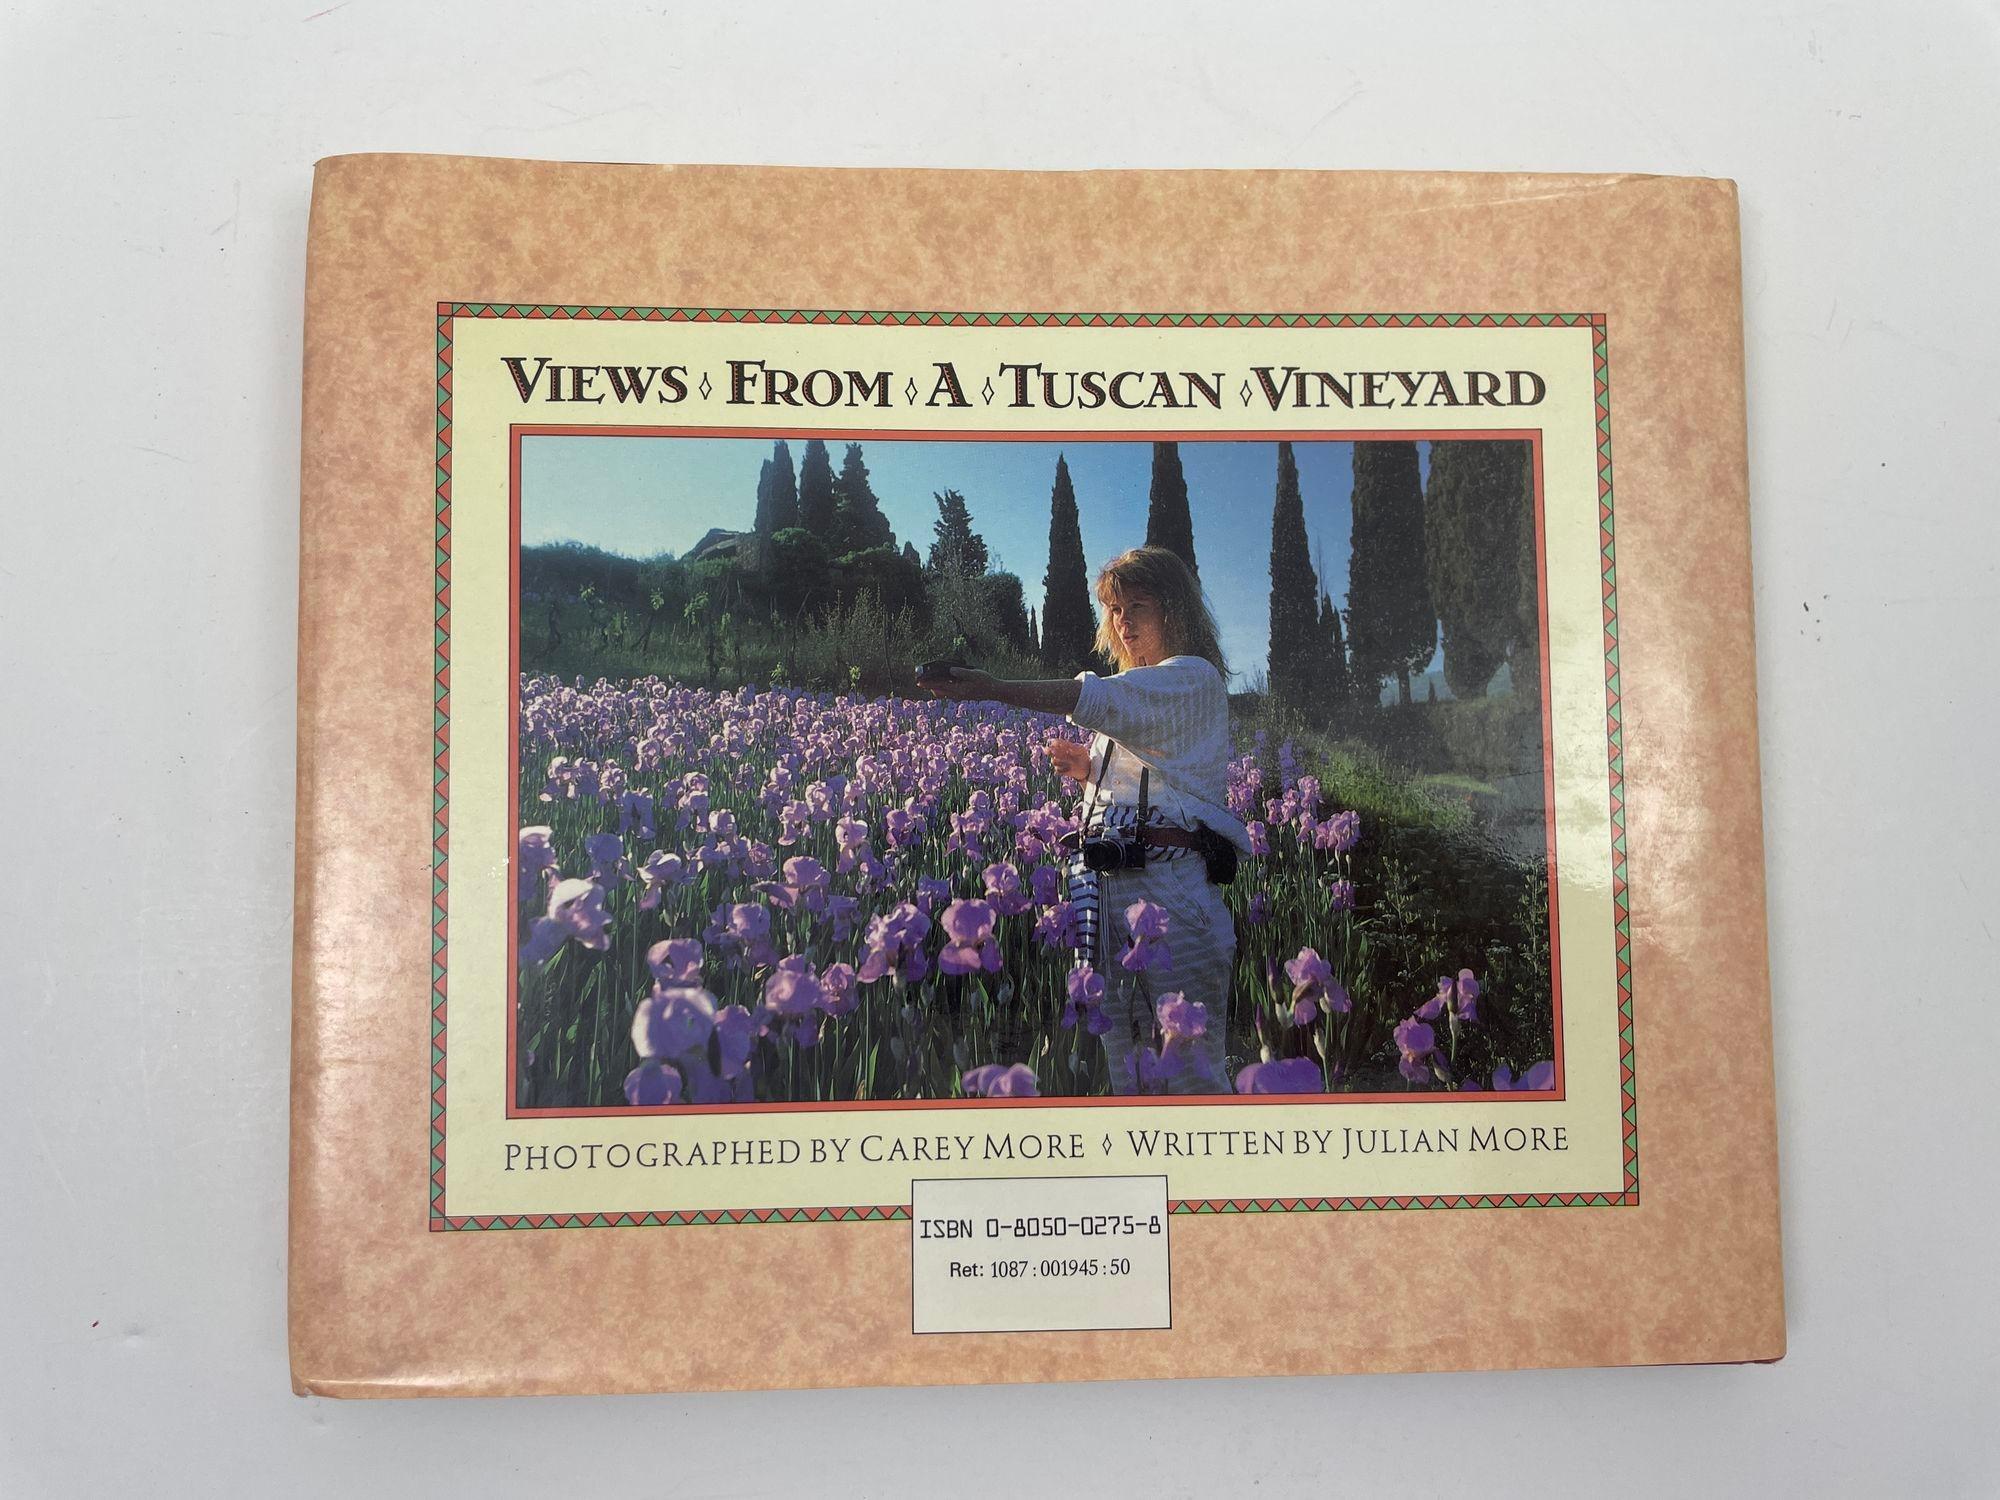 Rustic Views from a Tuscan Vineyard Hardcover Book by Julian and Carey More 1987 For Sale